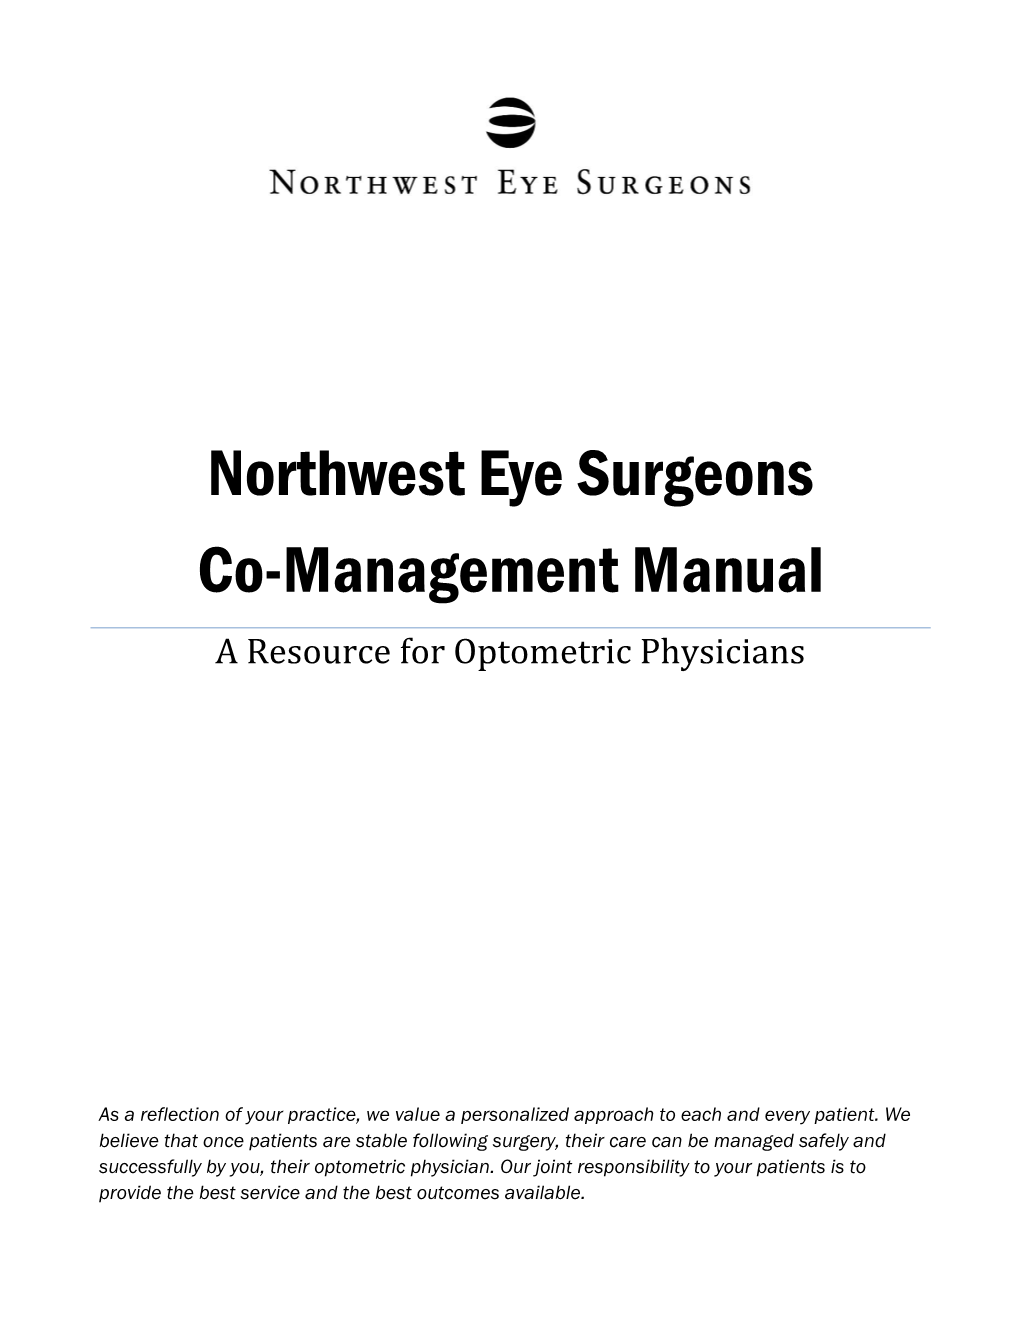 Northwest Eye Surgeons Co-Management Manual a Resource for Optometric Physicians